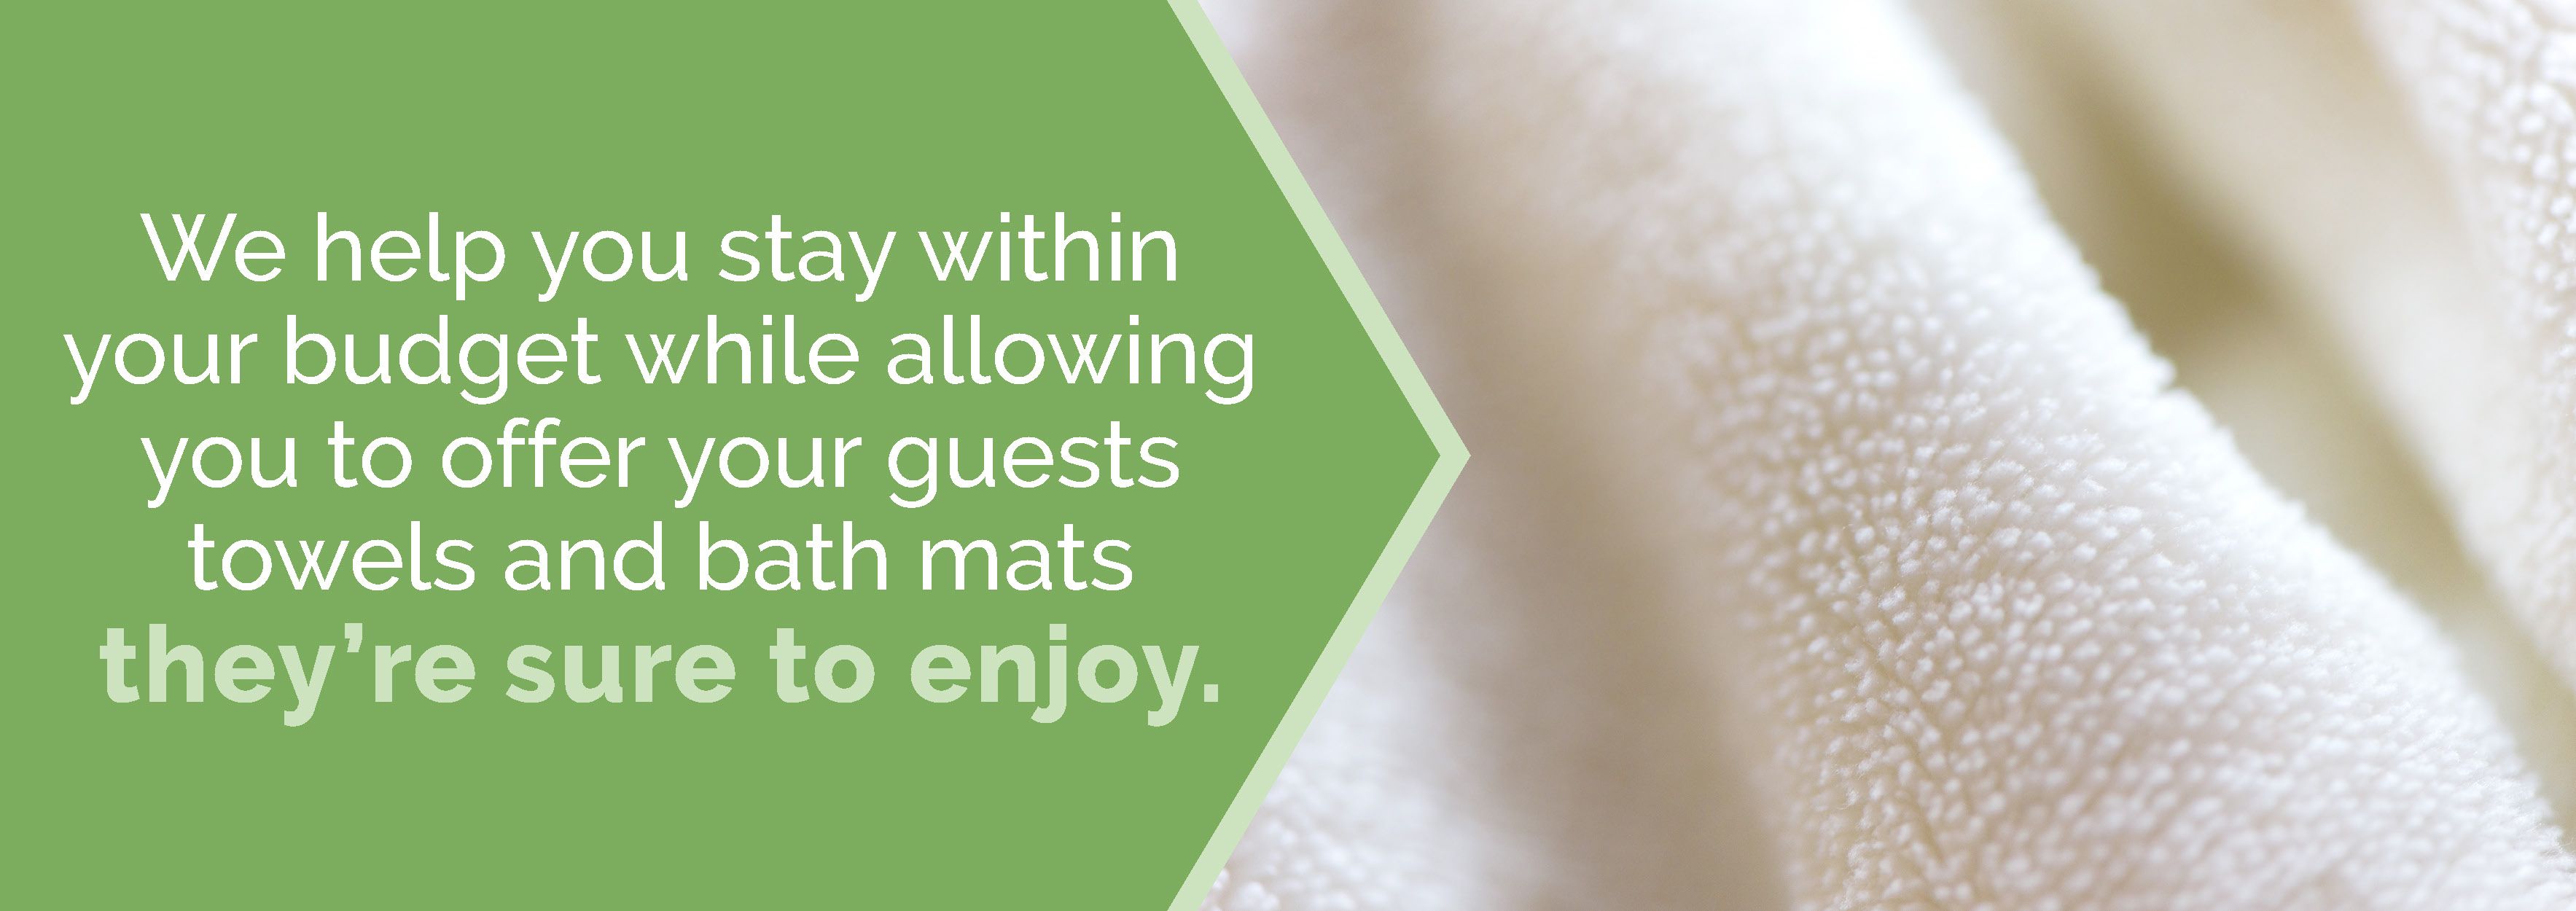 Stay within budget while offering guests towels and bath mats they're sure to enjoy.